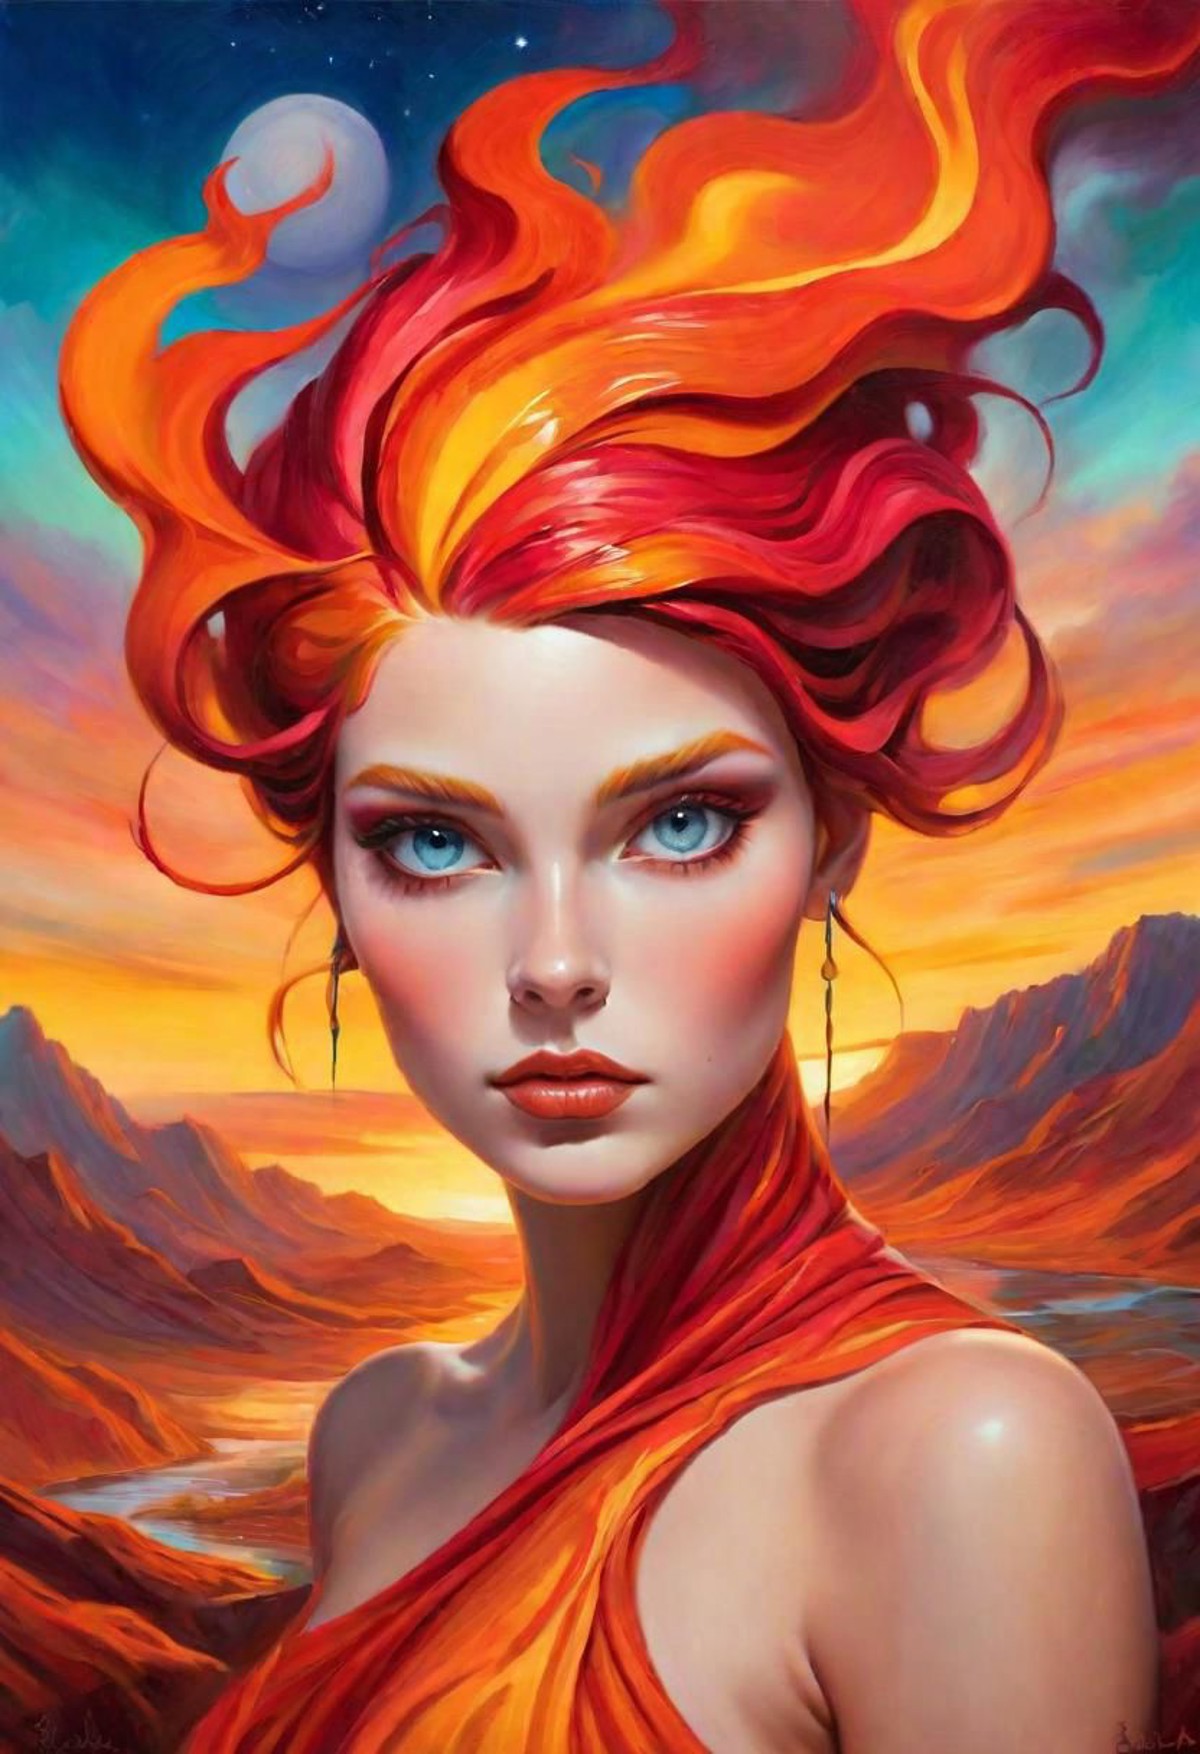 Christopher Balaska's vivid colors paint a surreal landscape as a stunning woman graces the scene, her piercing eyes gleam...